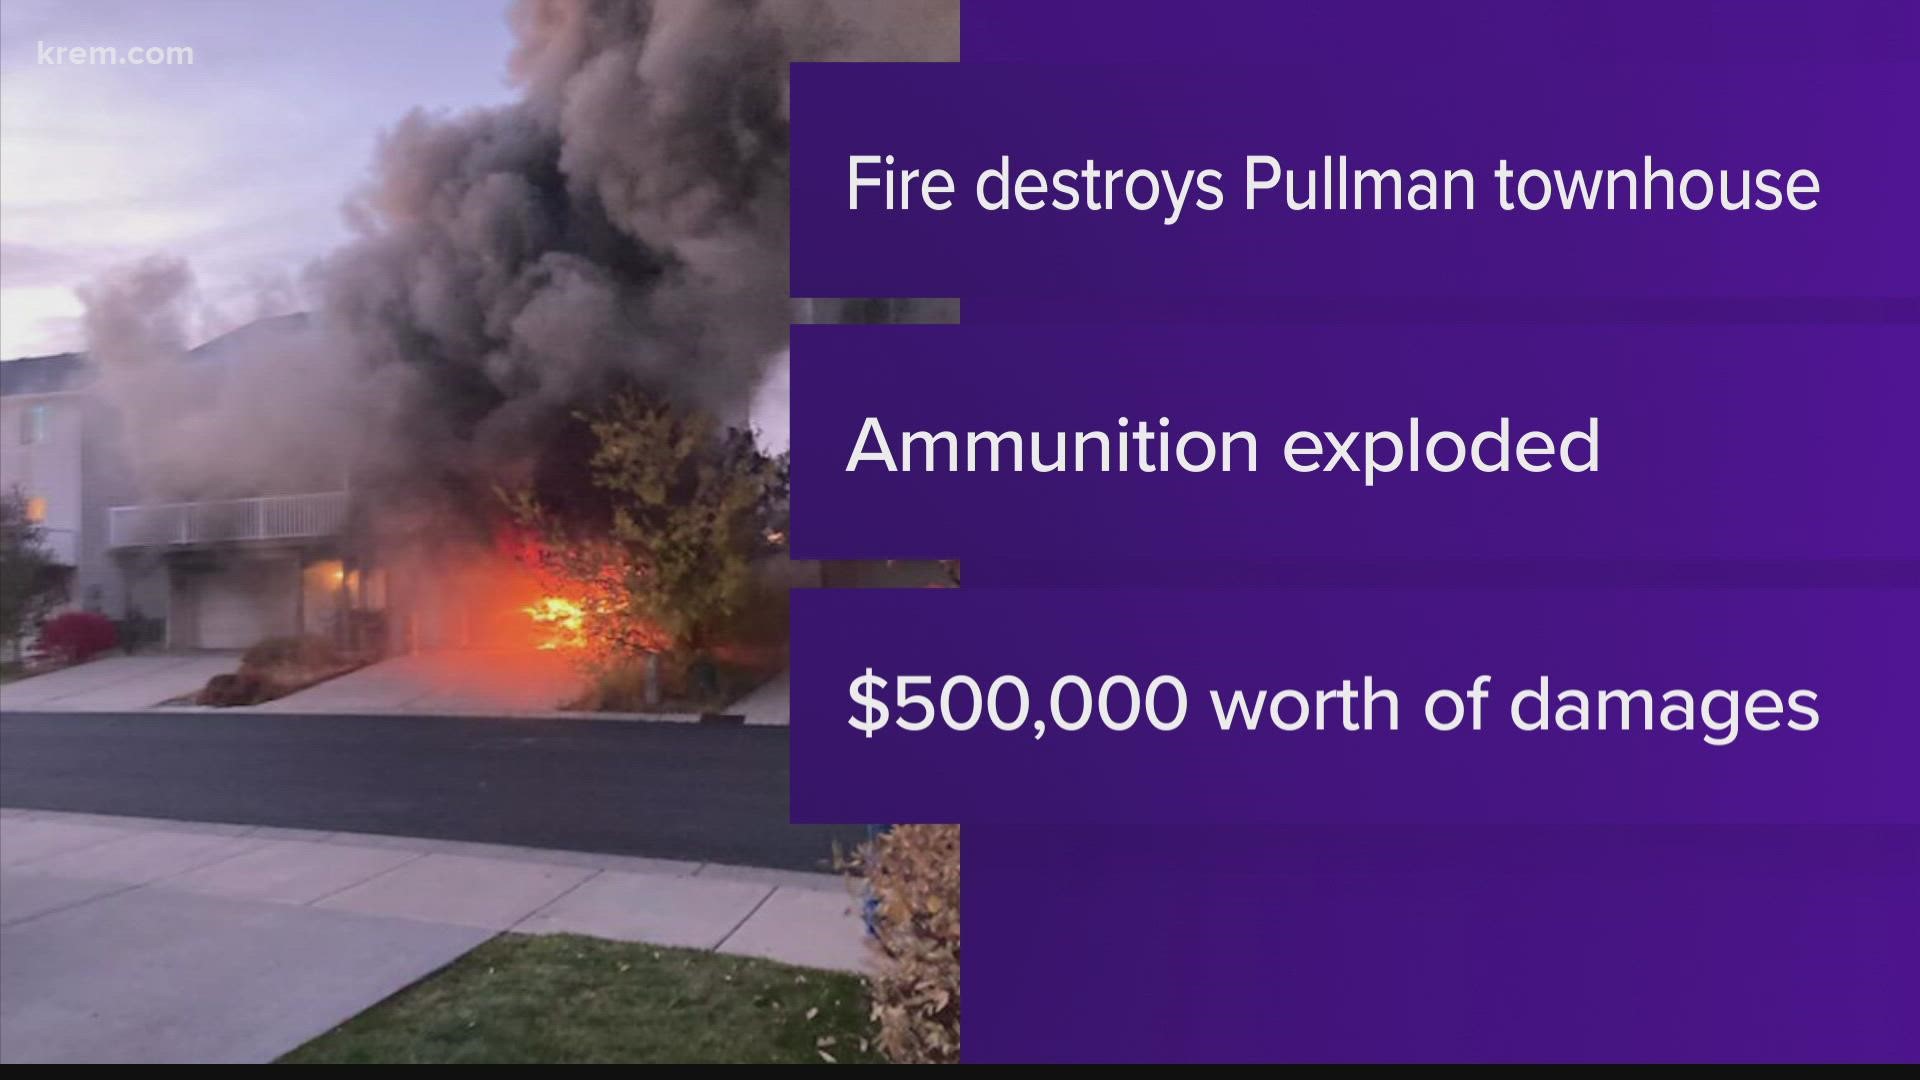 Pullman Fire Marshal Chris Wehrung estimated that damages to be around $500,000.